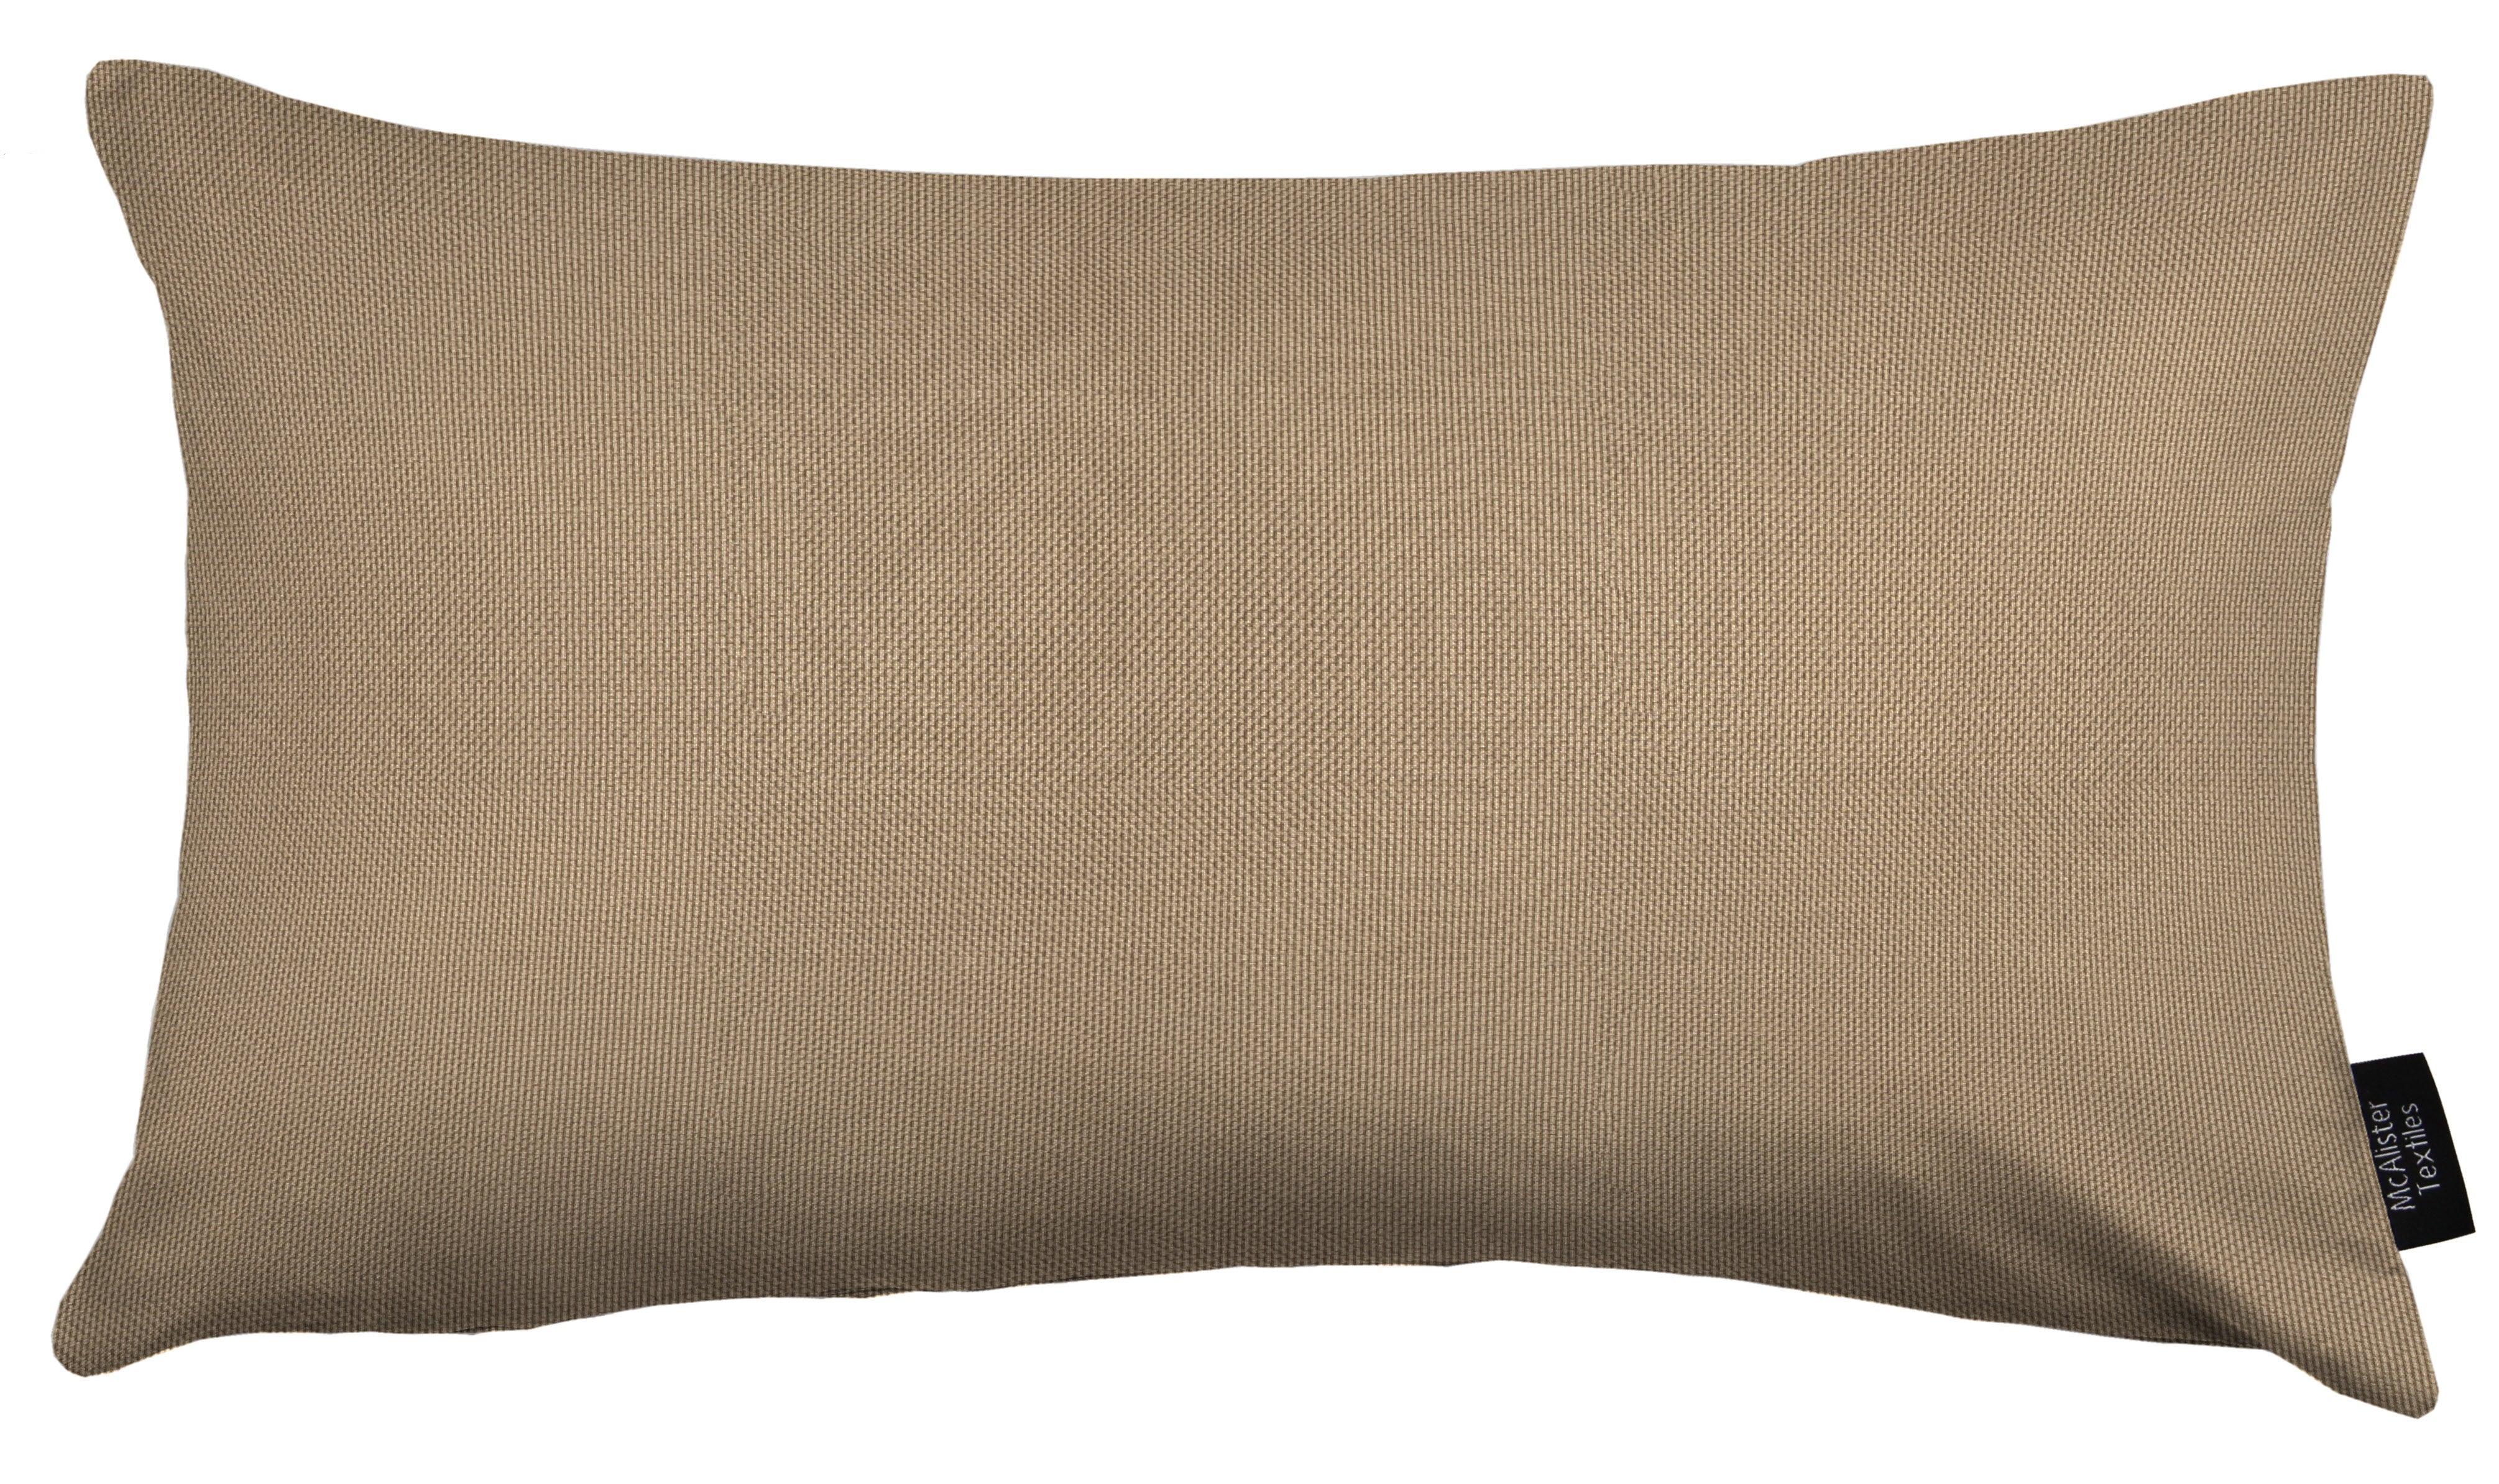 McAlister Textiles Sorrento Beige Outdoor Pillow Cover Only 50cm x 30cm 